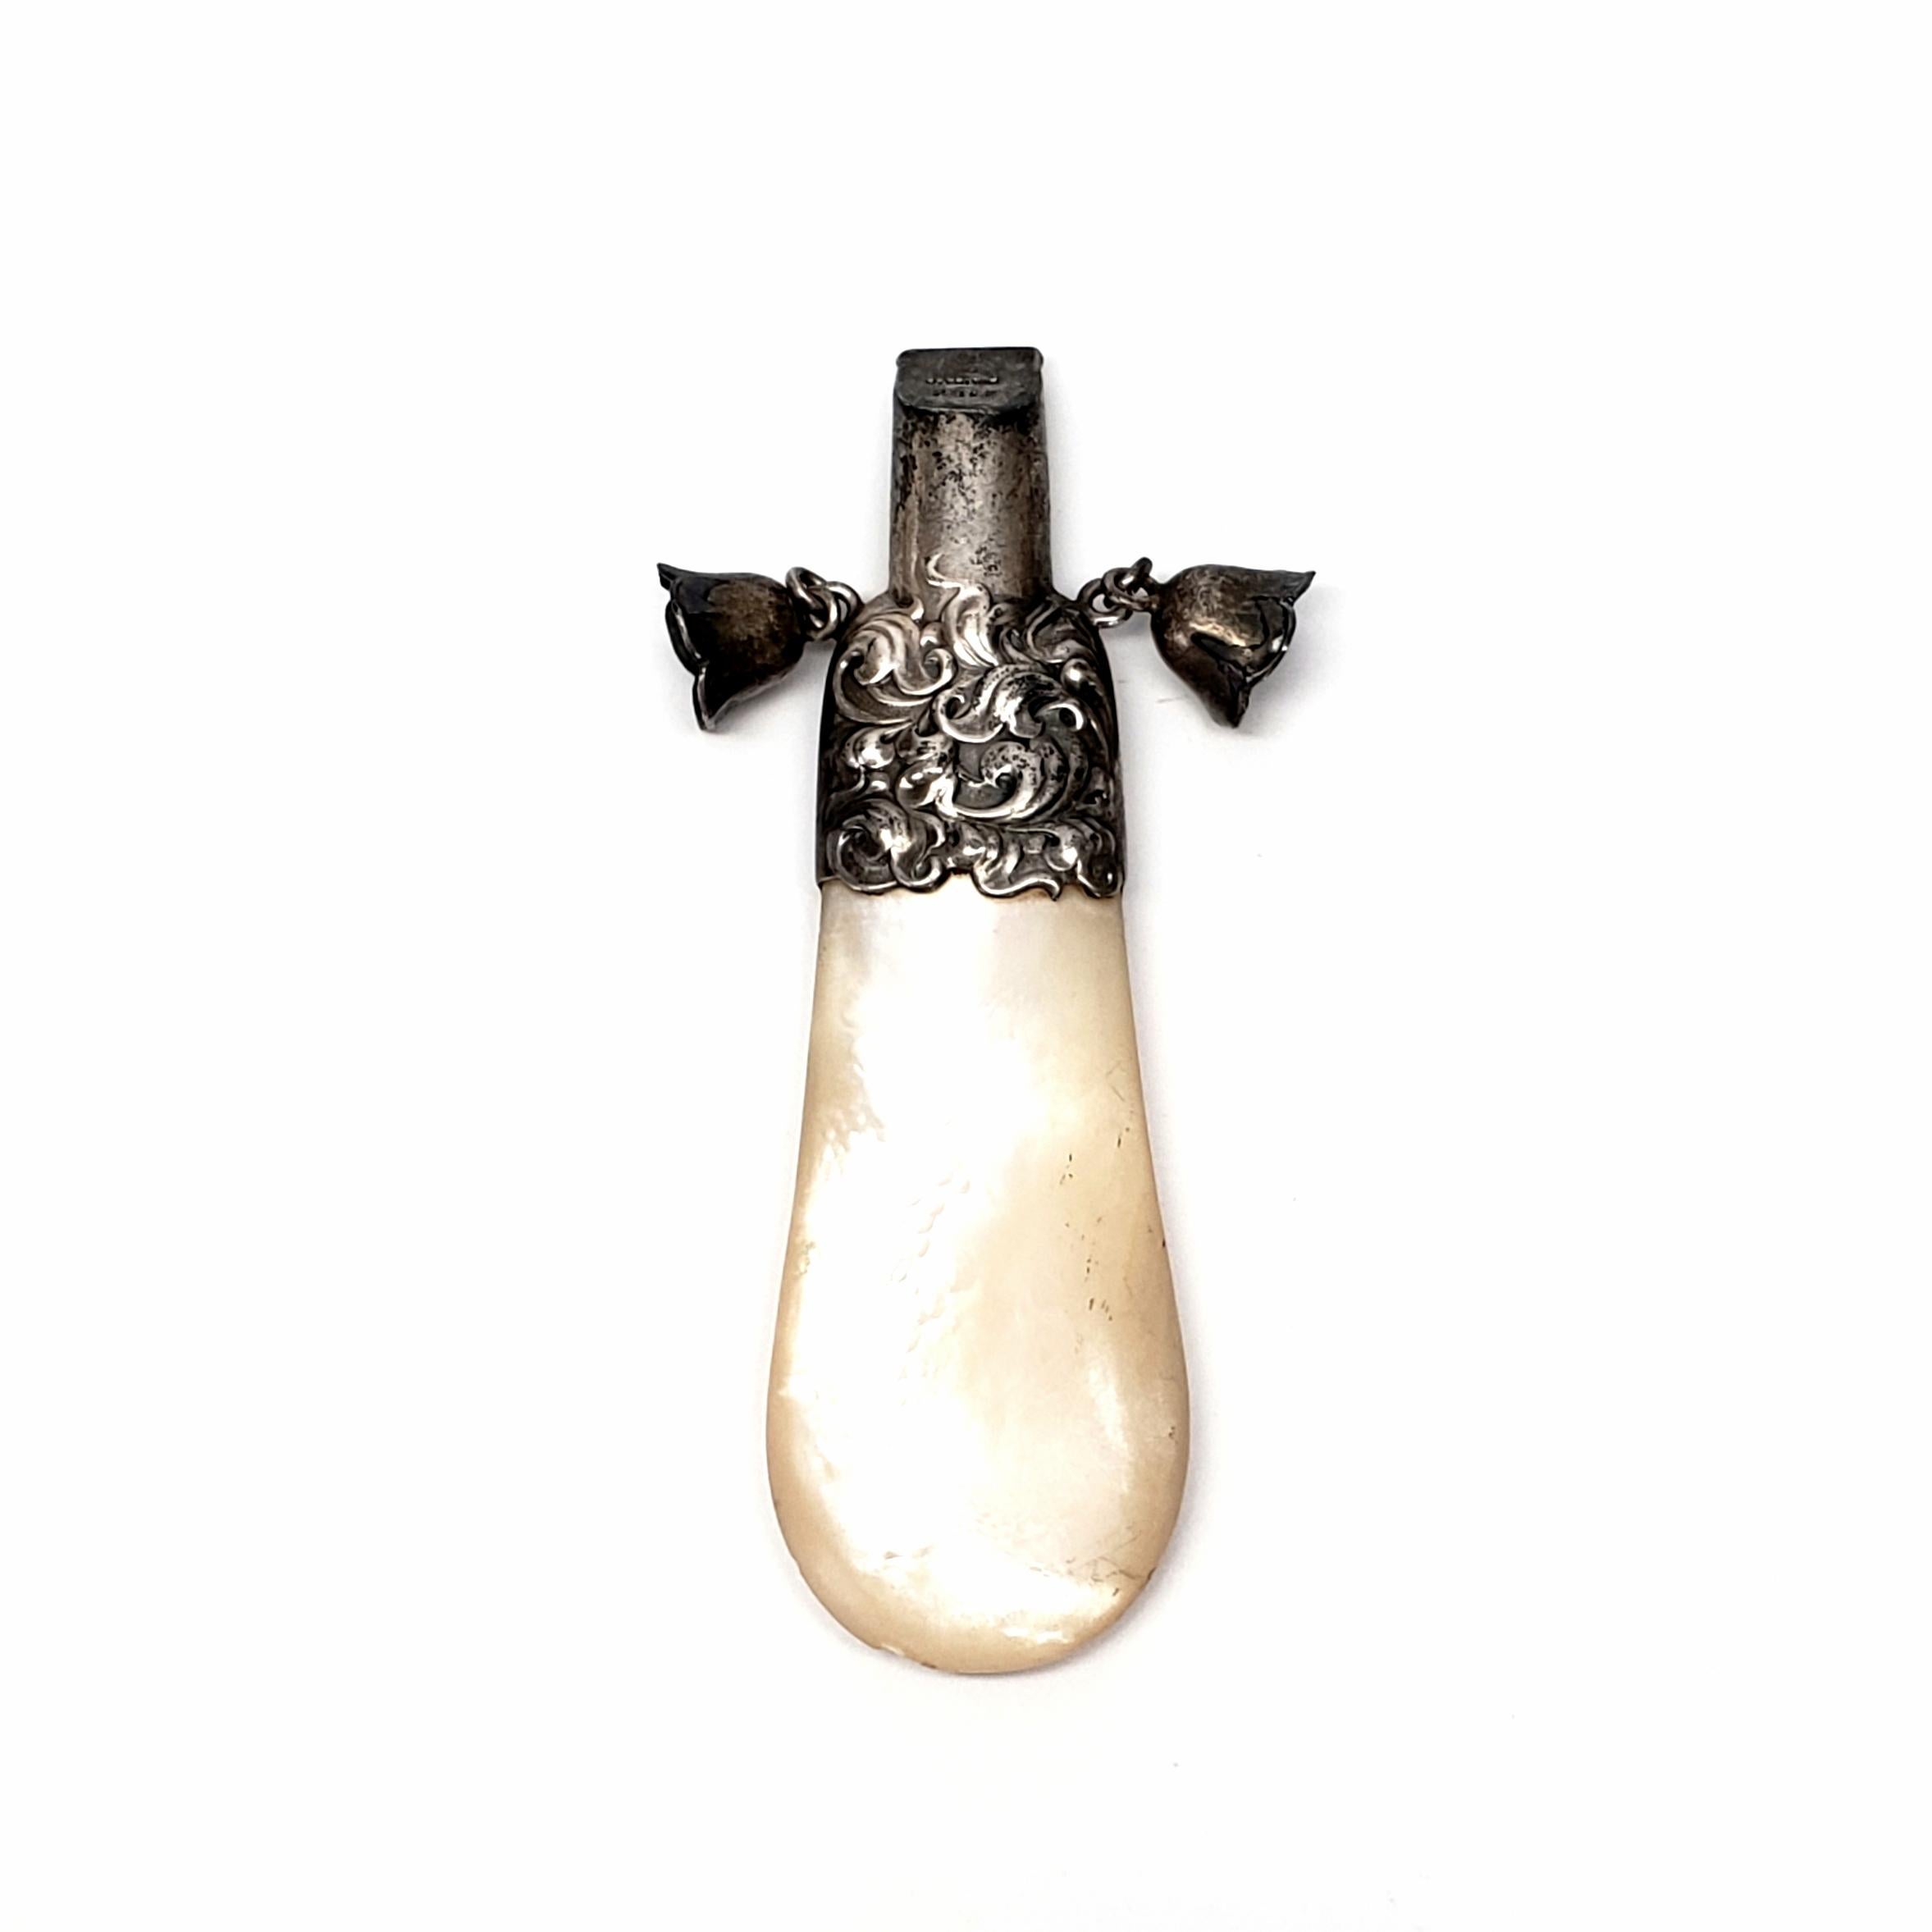 Vintage sterling silver and mother of pearl baby whistle and rattle by Whiting Manufacturing Co.

Beautiful piece from Whiting Manufacturing Co of NY, NY featuring a large piece of mother of pearl topped with a sterling silver whistle and two